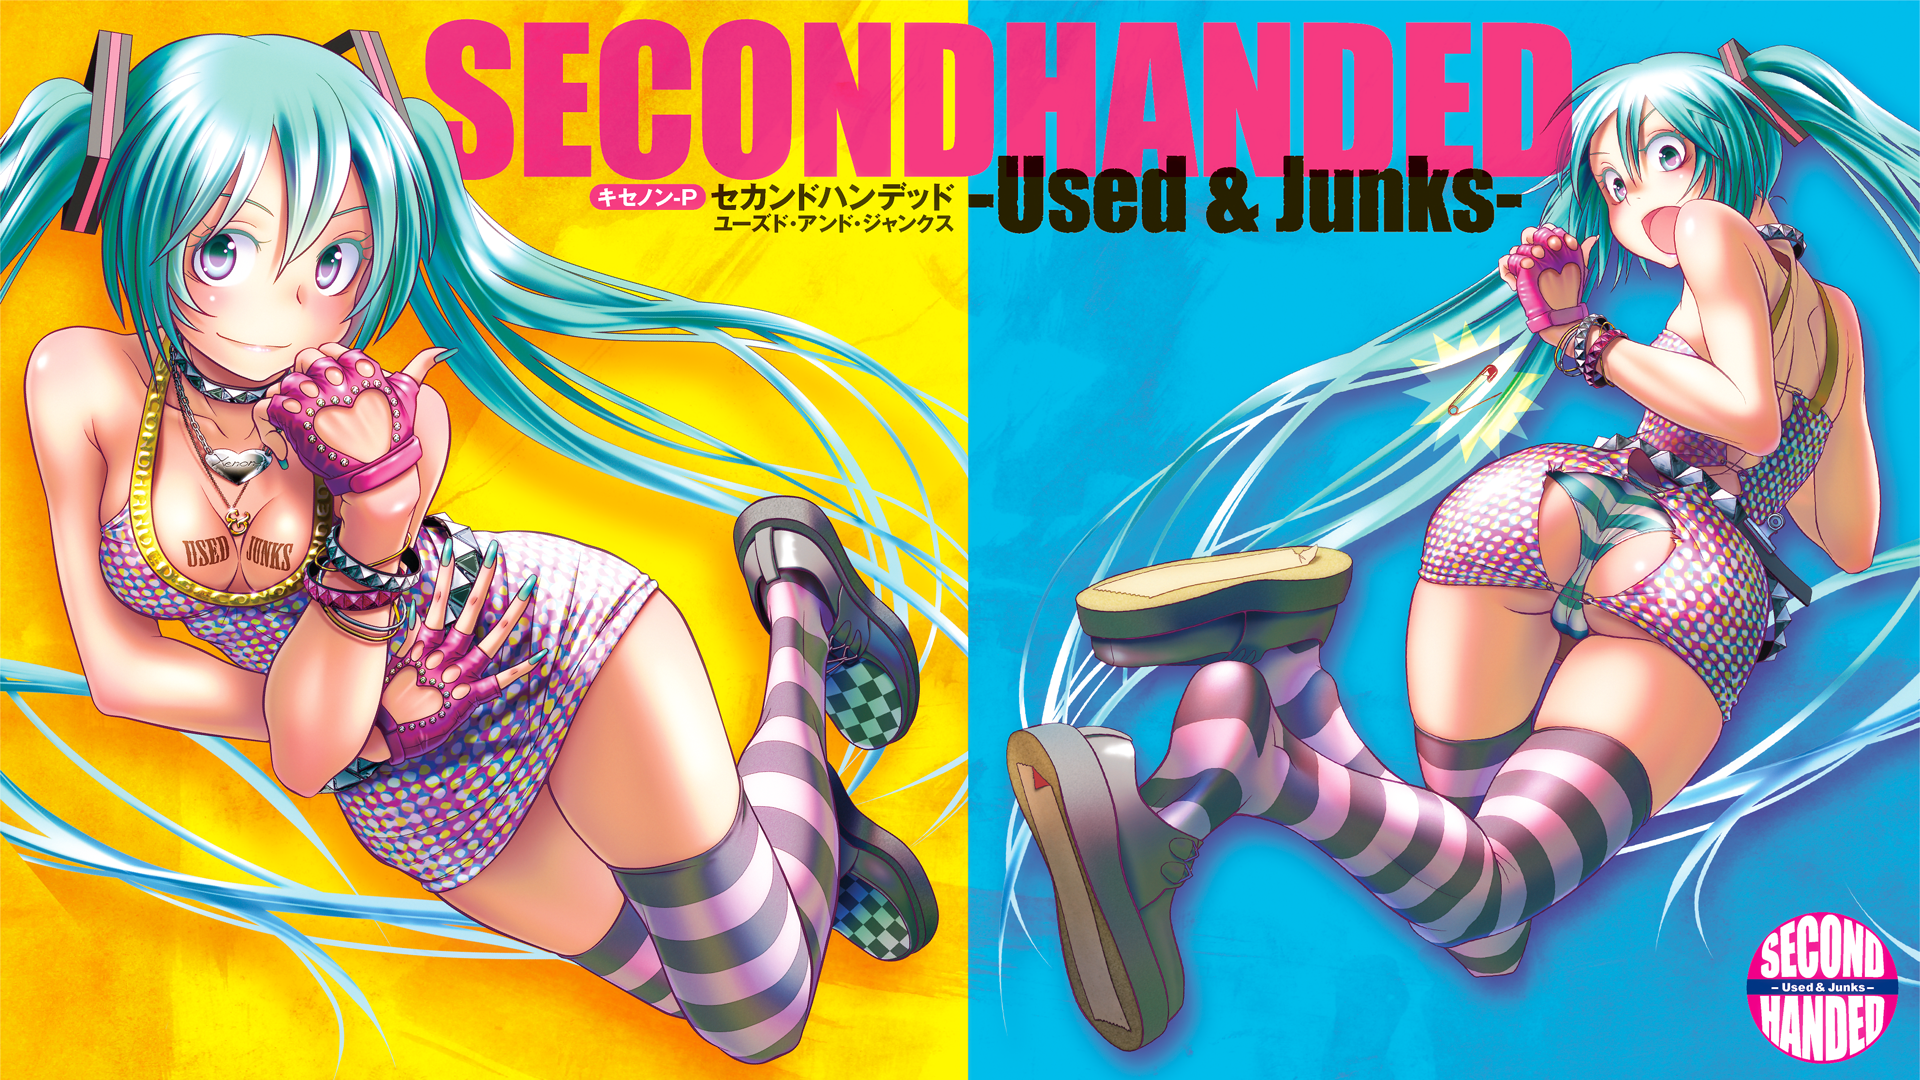 Secondhanded Used Junks キセノンp Xm Feat 初音ミク Vocaloid Database